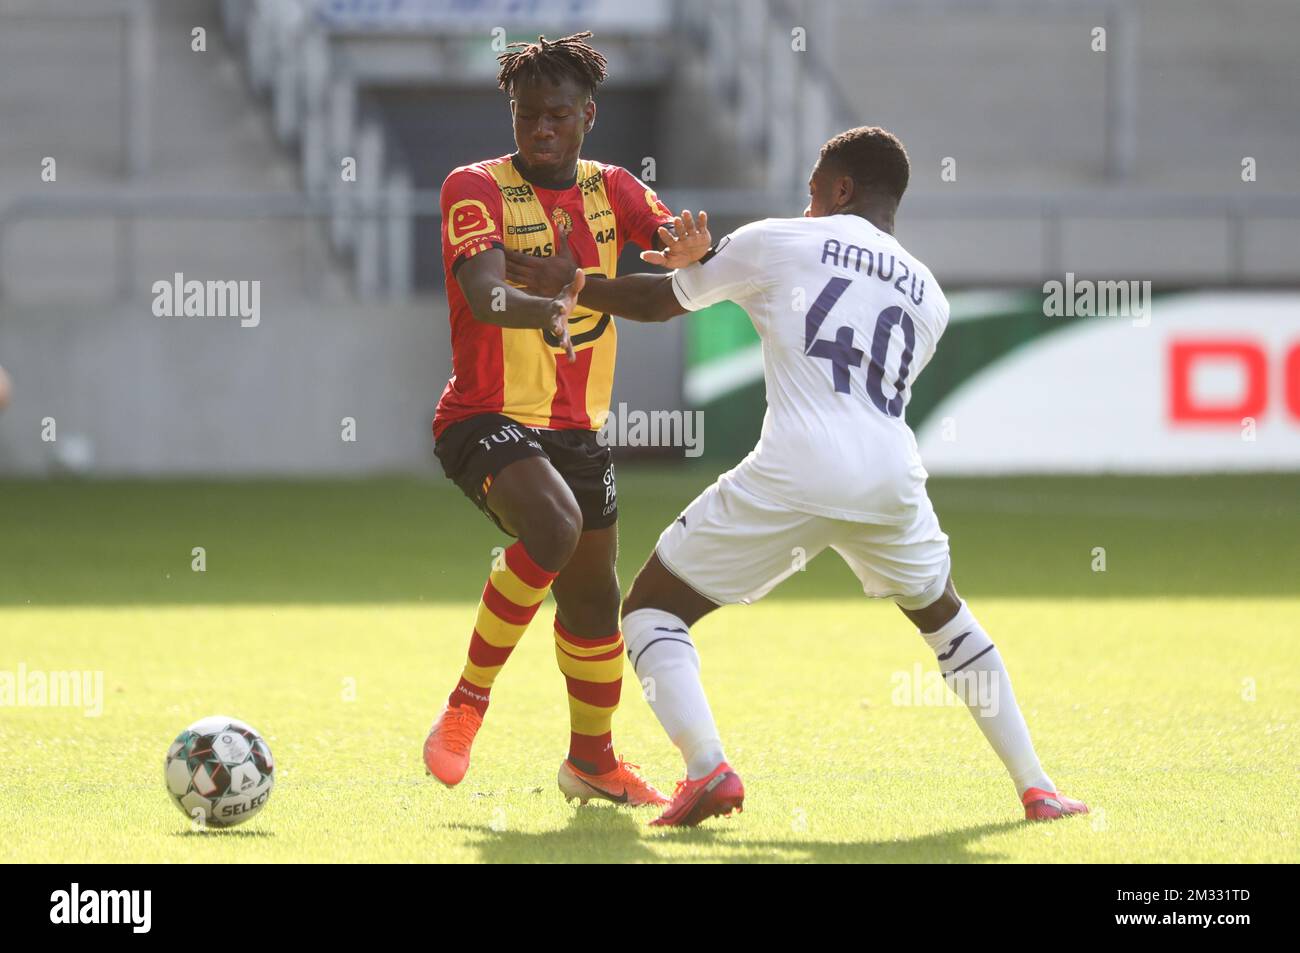 Anderlecht's Francis Amuzu and OHL's Kamal Sowah fight for the